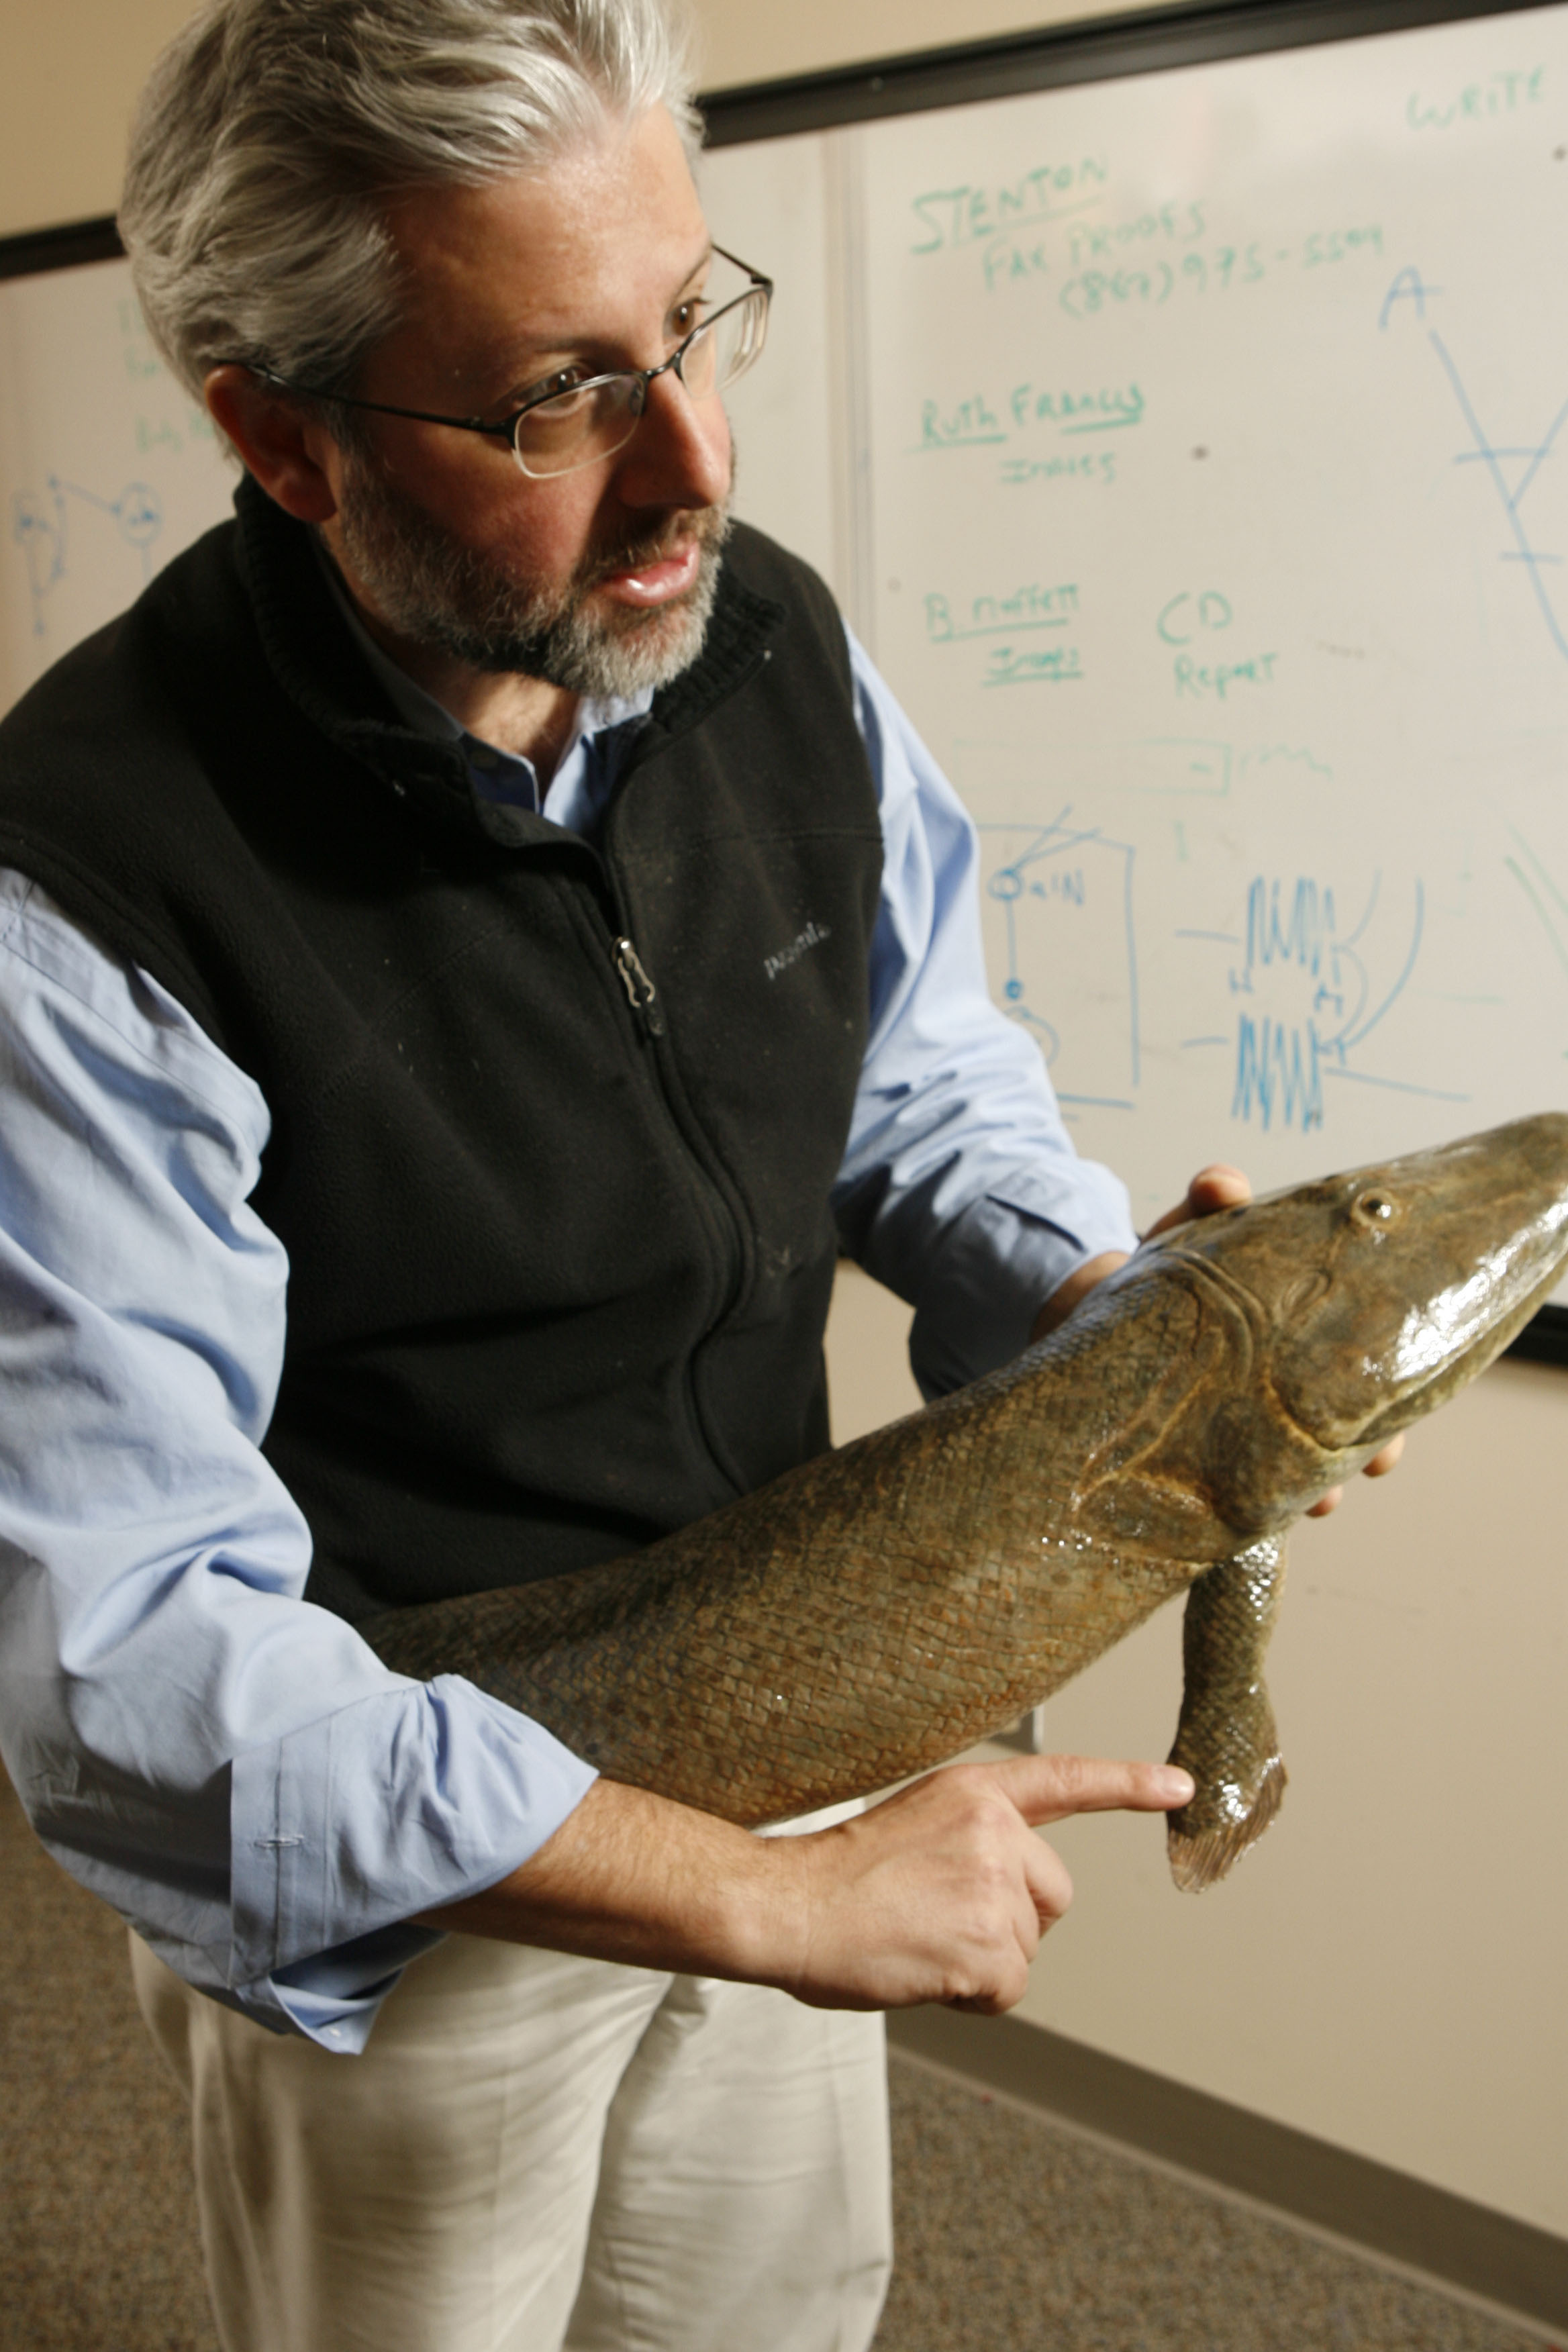 Part of the family: Shubin and a model of the Tiktaalik—ancestor to us all